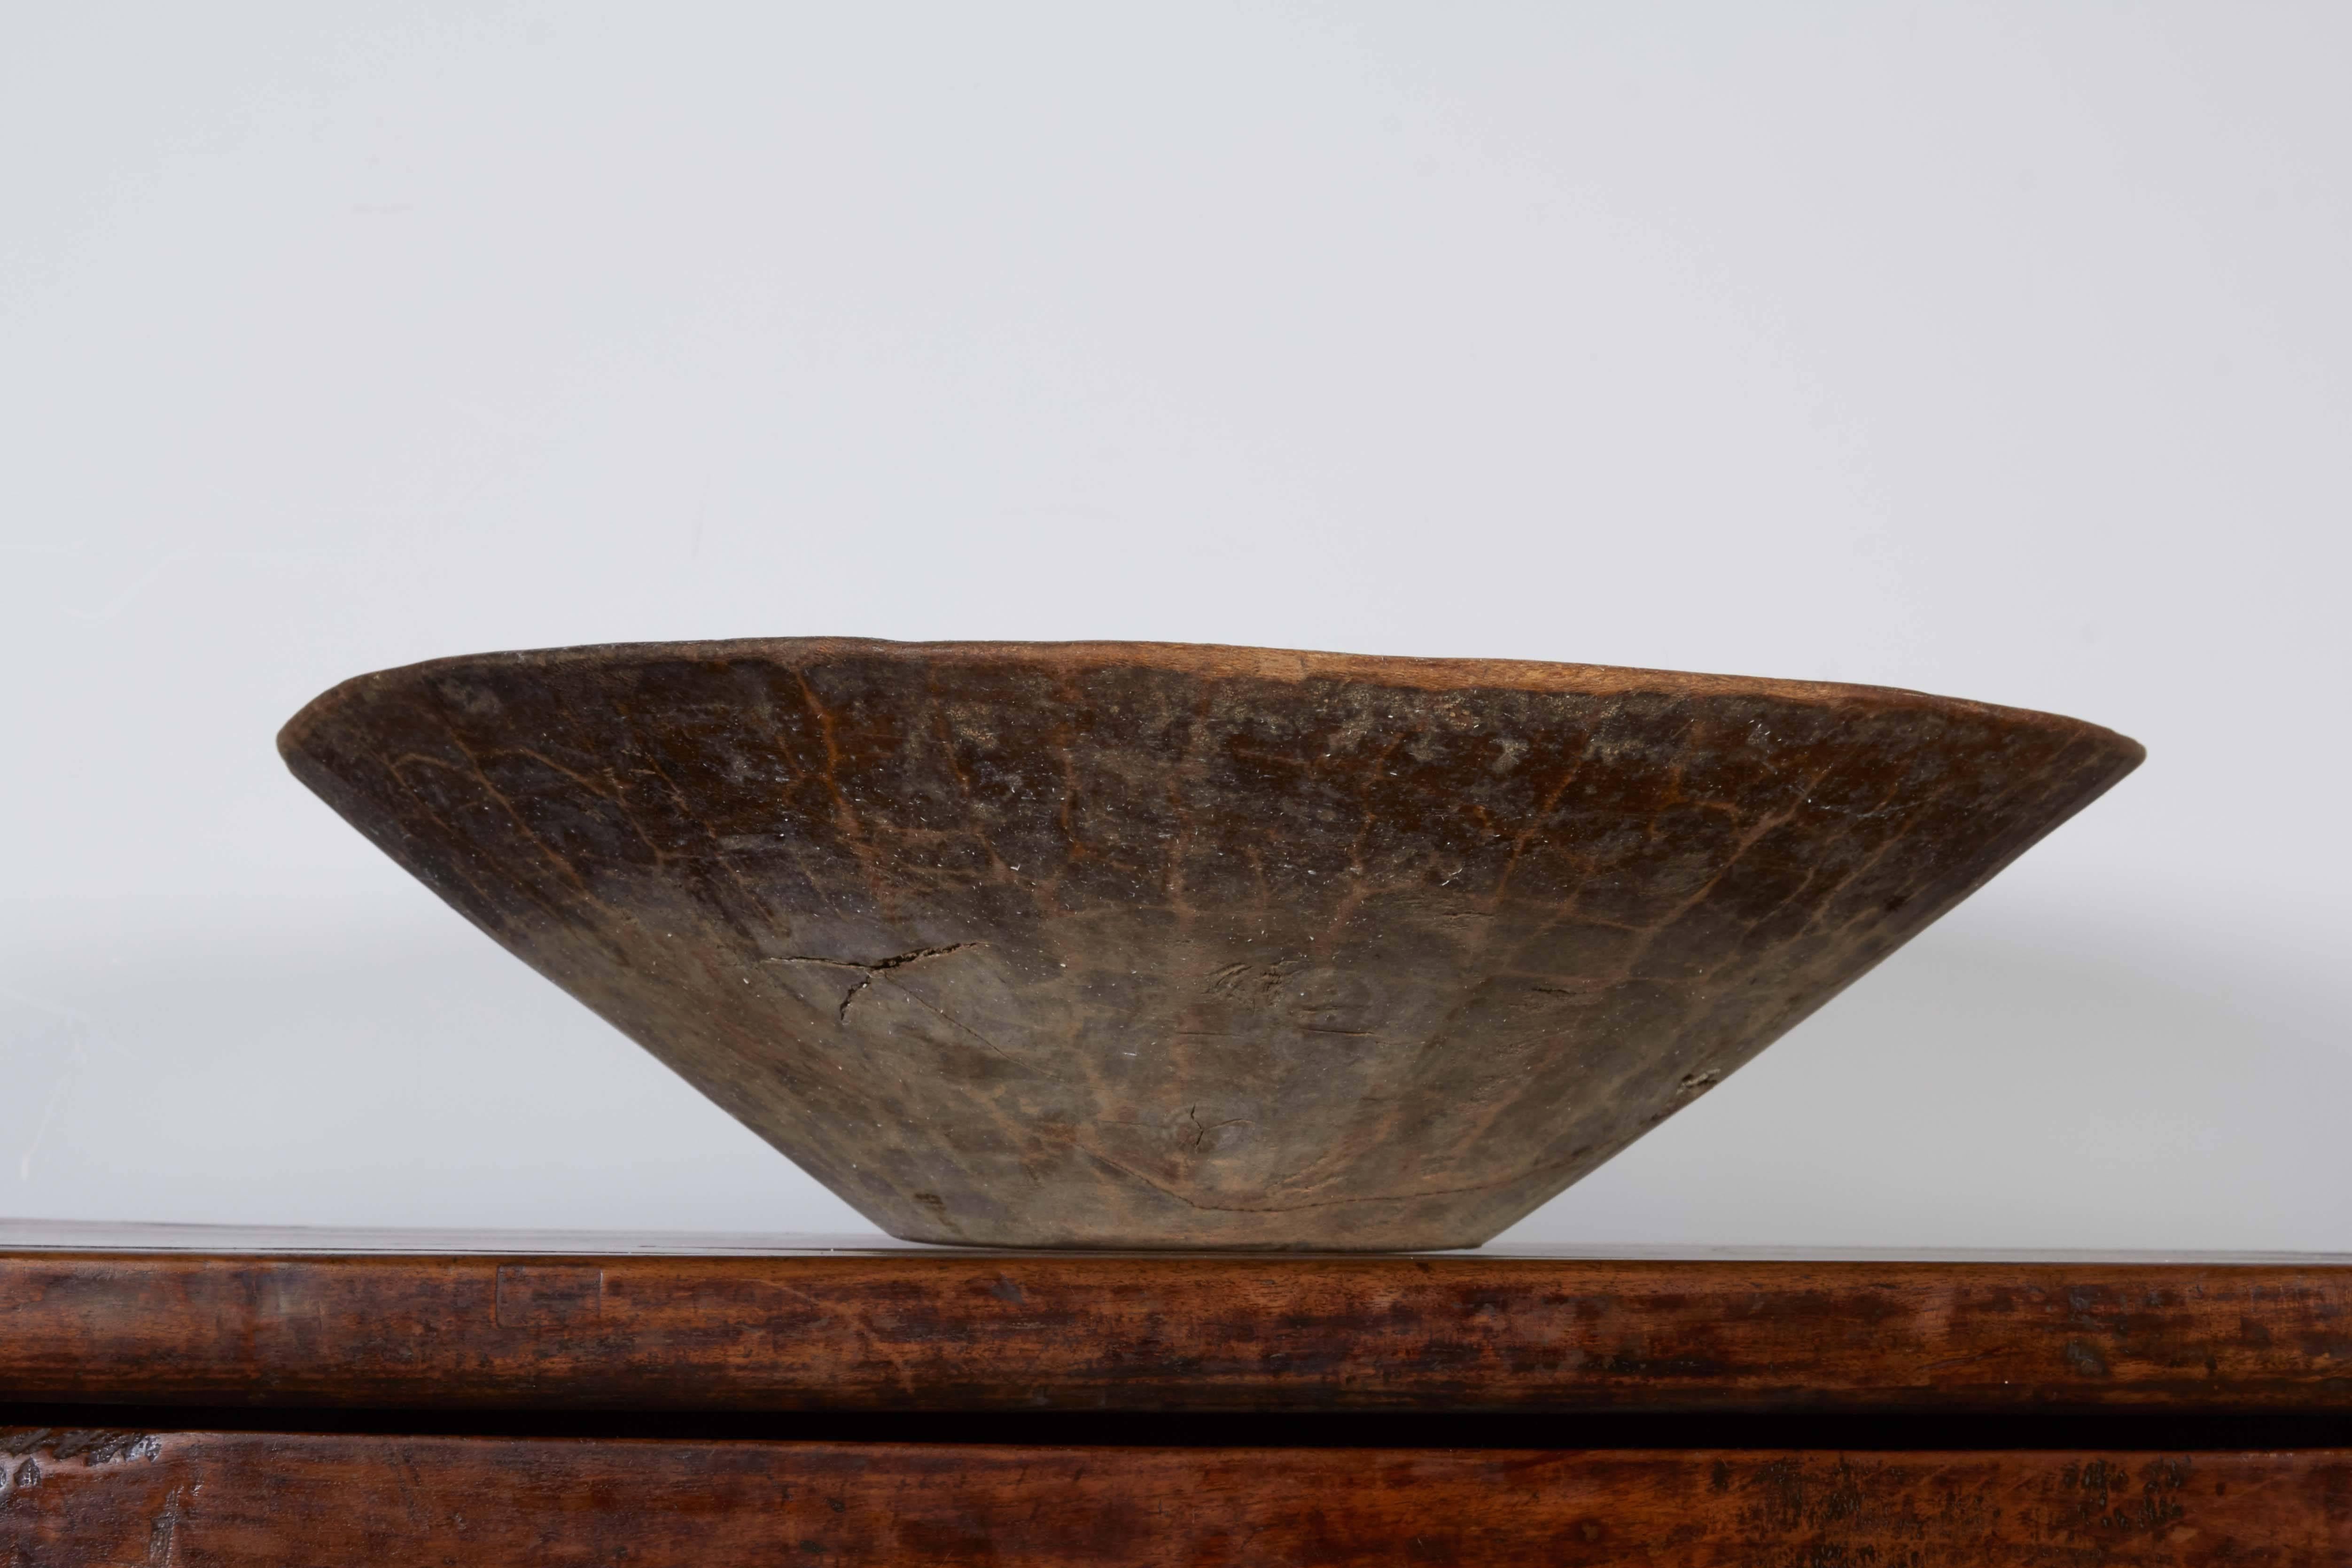 American Large and Beautifully Worn Working Bowl with Great Patina